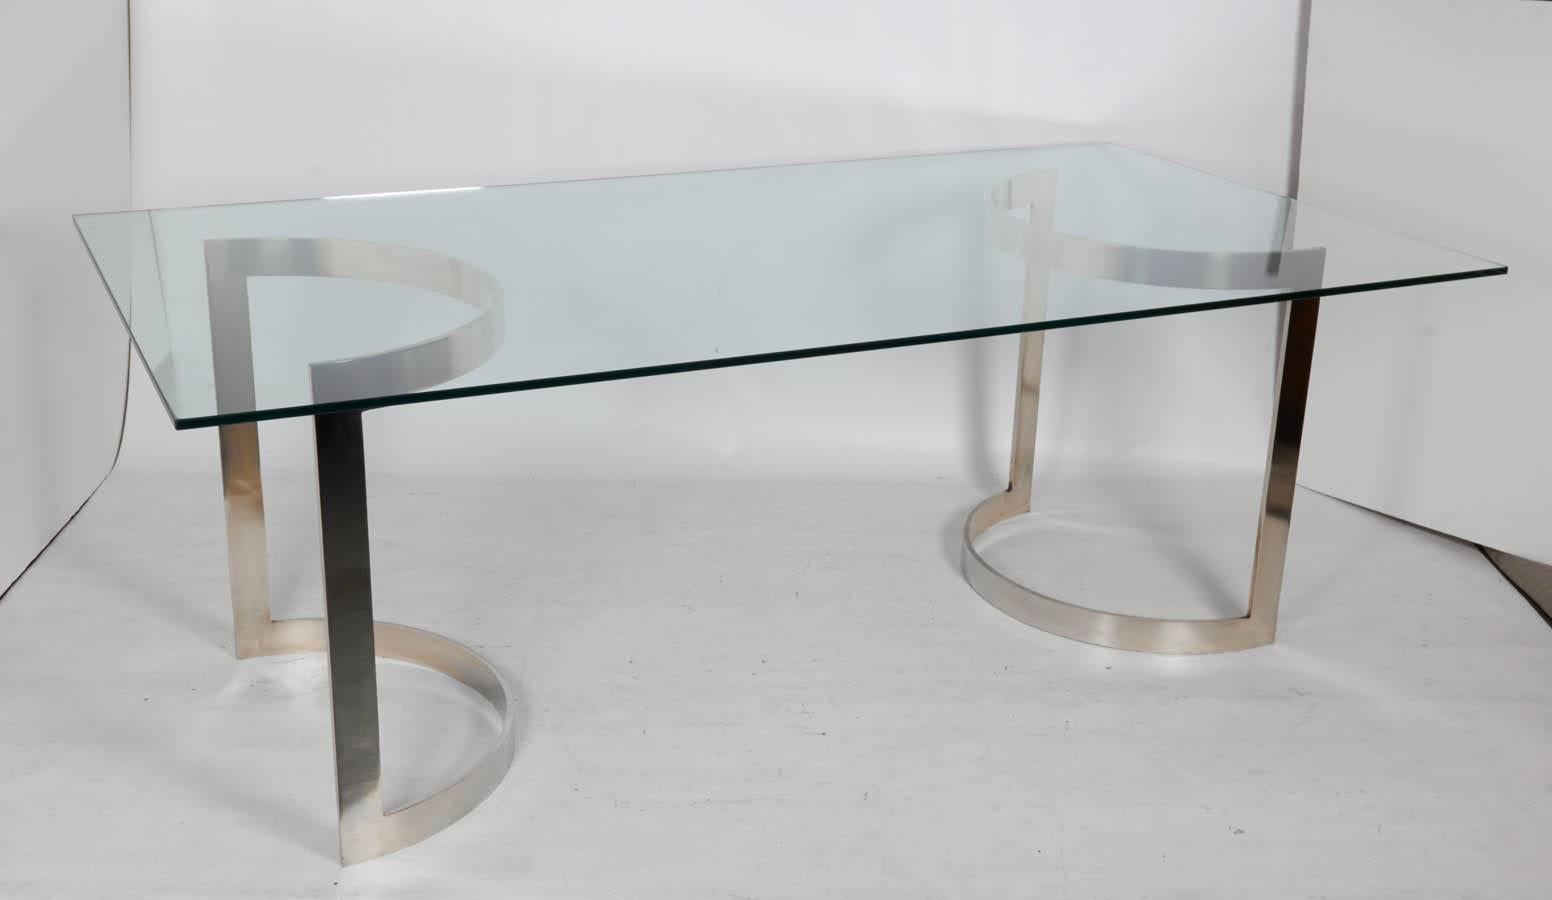 Remarkable glass top dining table with two polished bronze supports. Chic! Please contact for location.